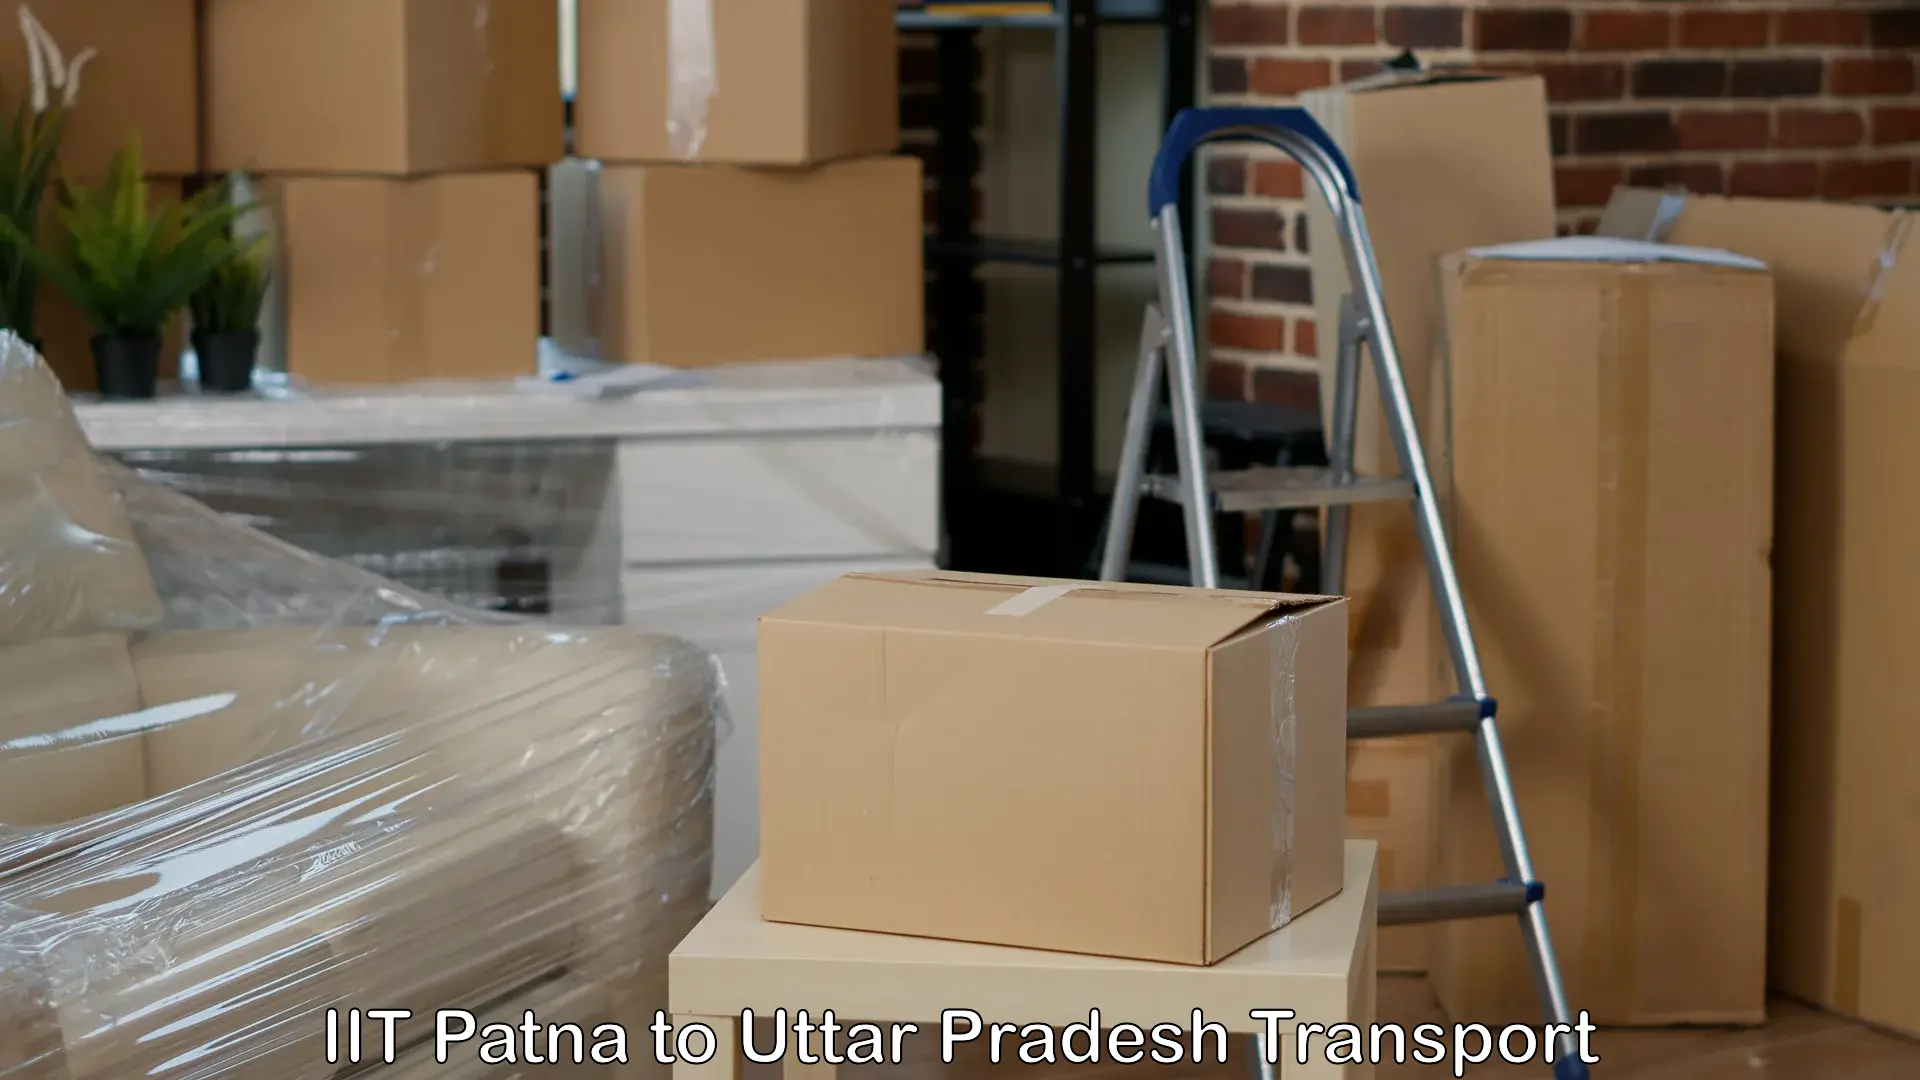 Commercial transport service IIT Patna to Unnao